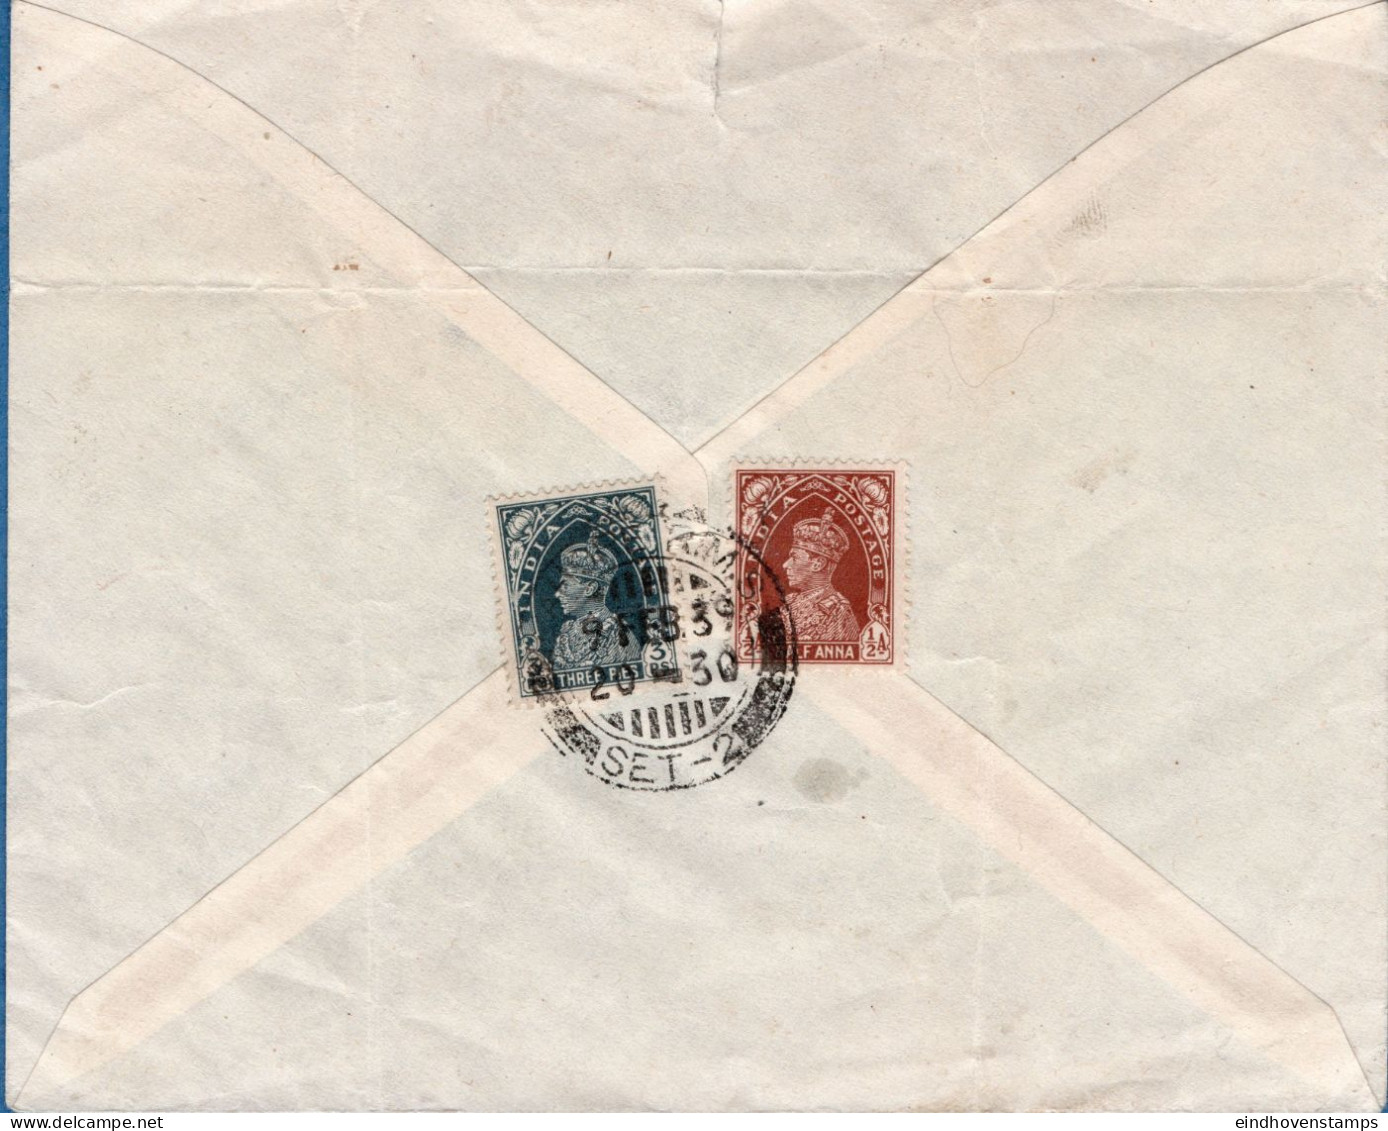 British India - Pakistan Bookpost To Switserland Franked 3p+½d Cancel Lahore R.M.S. 9 Feb 39, Folded With Tear 2311.1008 - 1936-47 Koning George VI